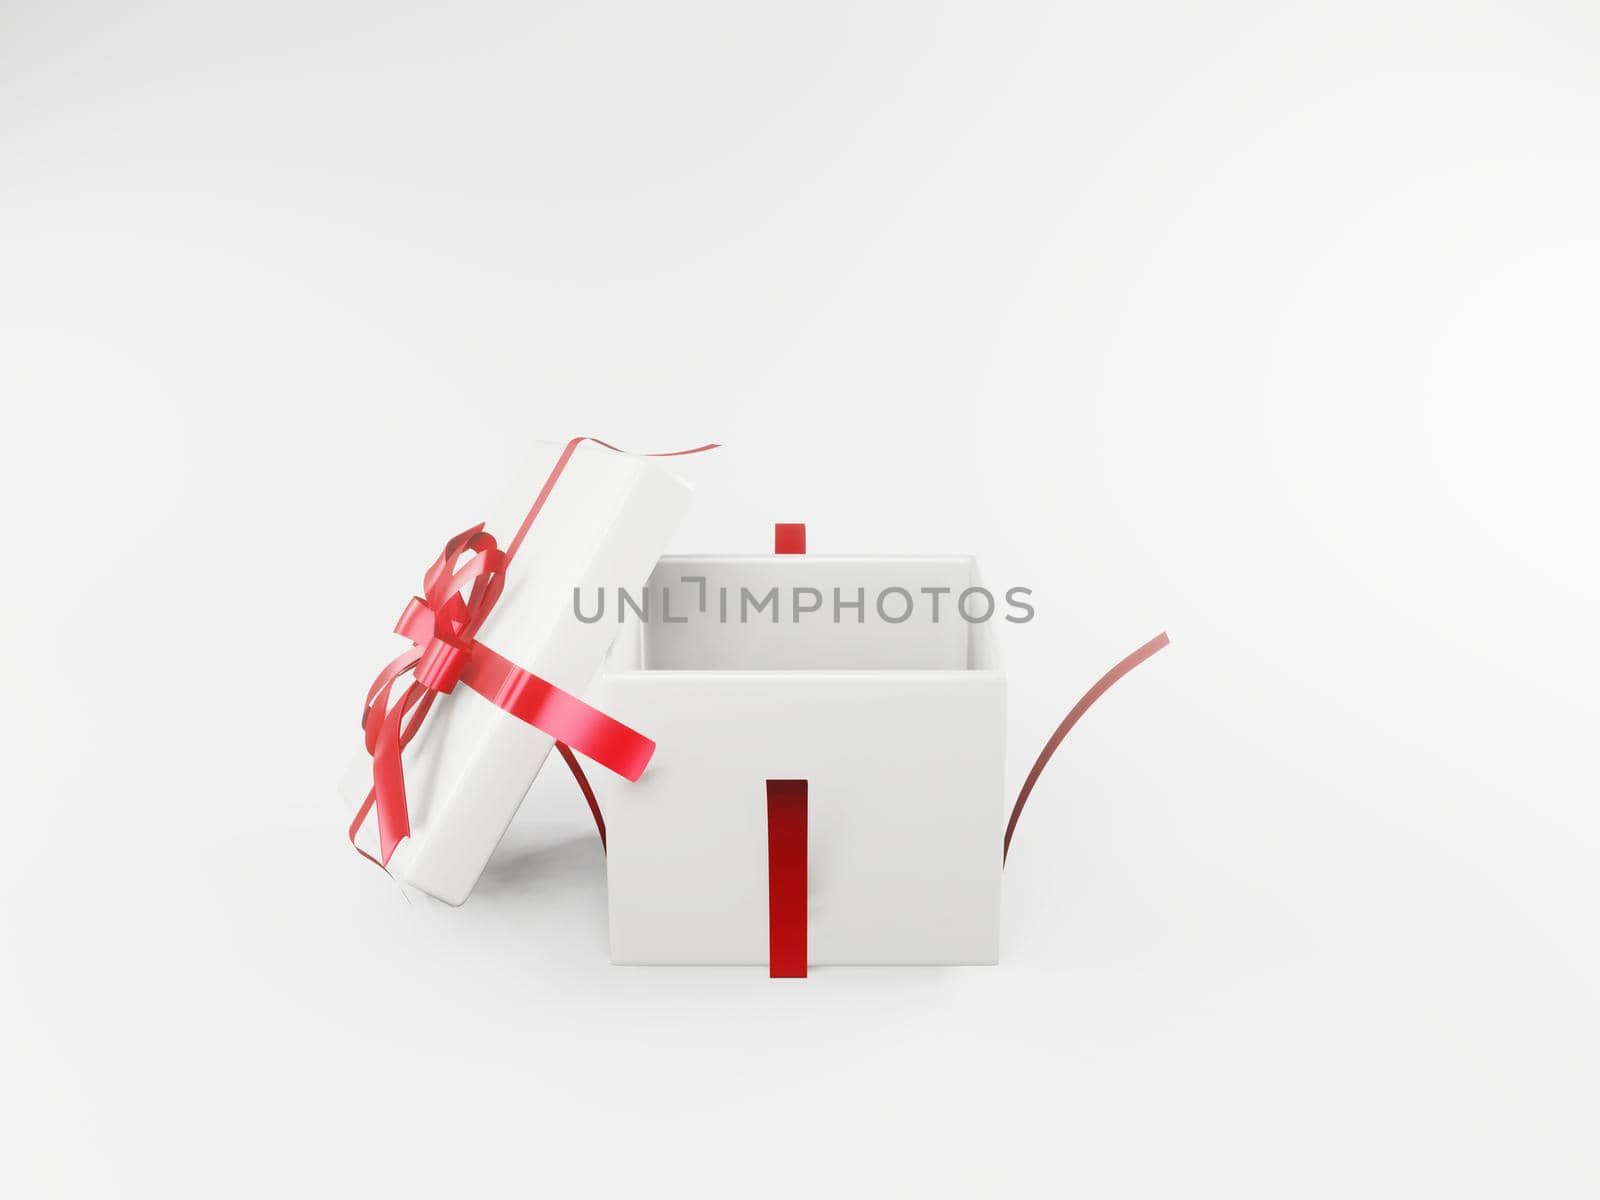 Open gift box or gift box with red ribbon and bow isolated on white background with 3d shadow rendering. Festival concept, gift-giving, special day, Christmas, valentines day and celebrations new Year